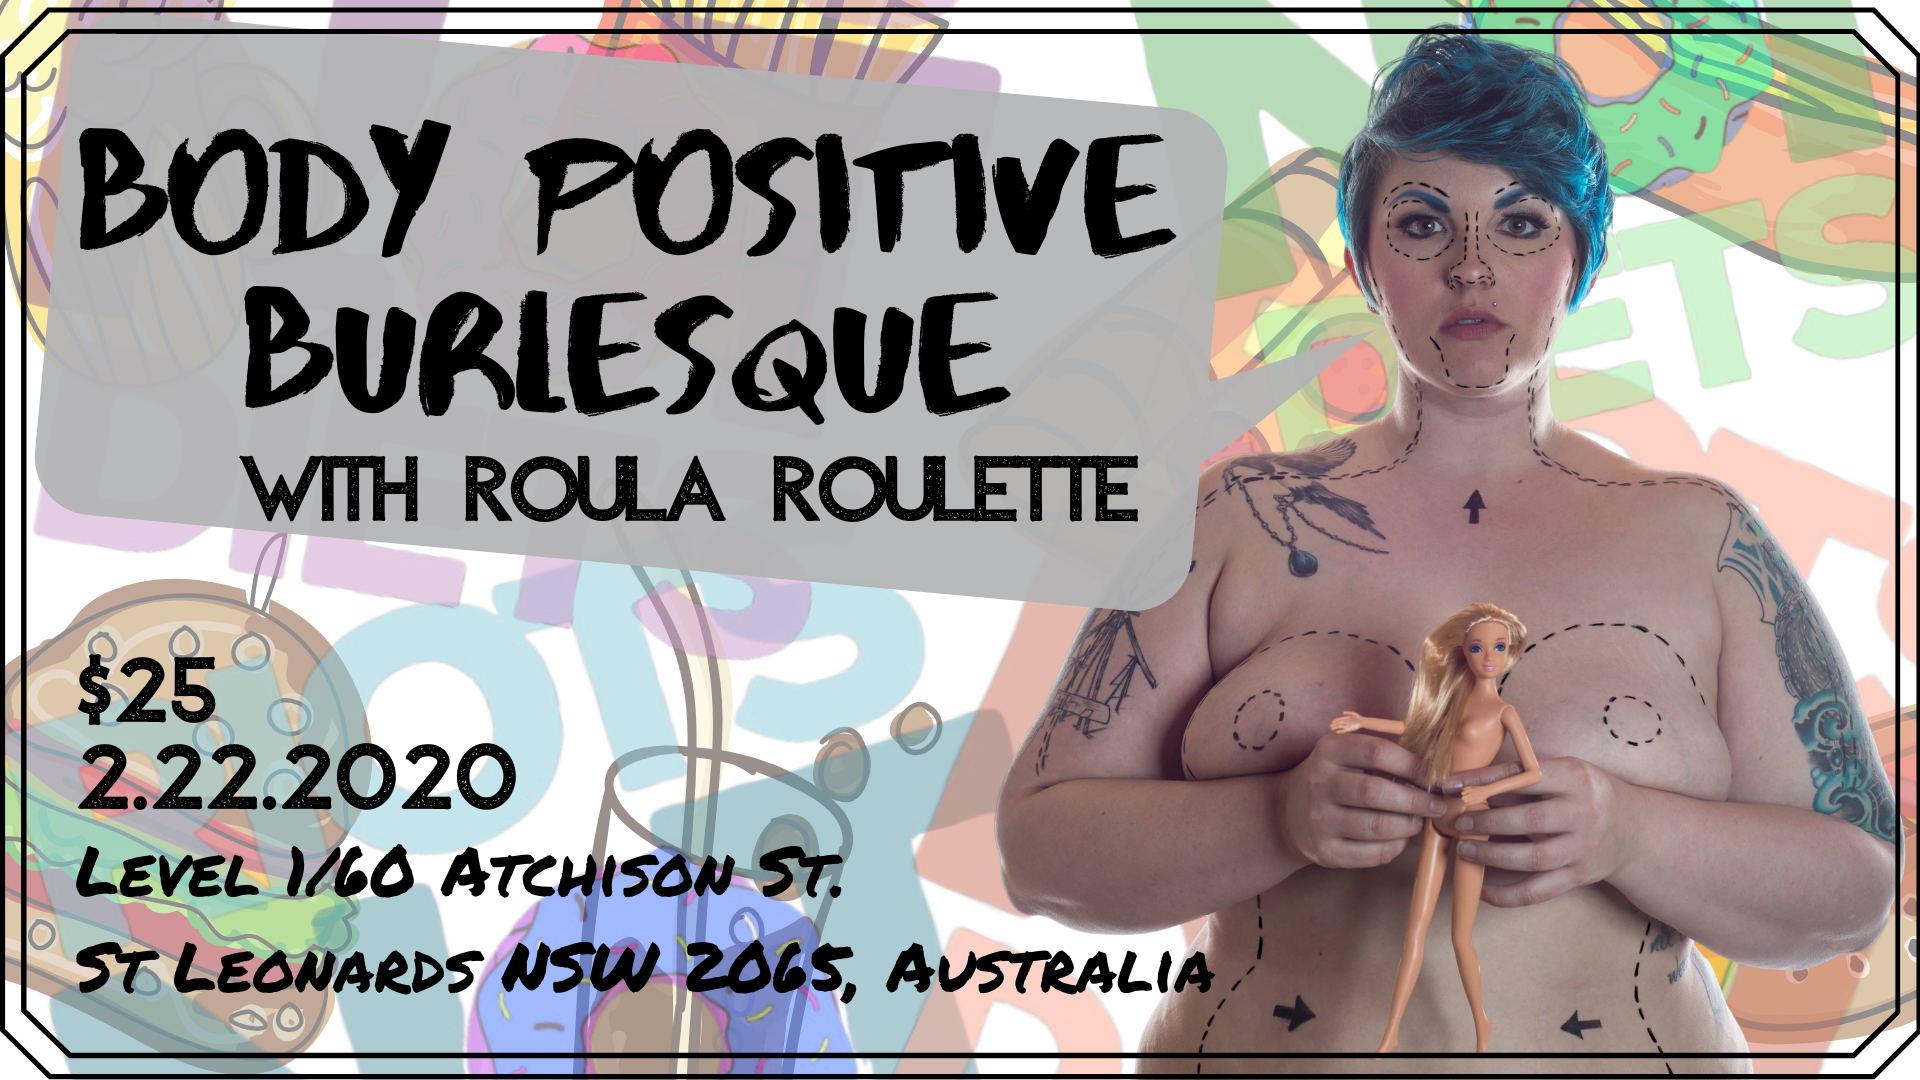 Body Positive Burlesque! with Roula Roulette